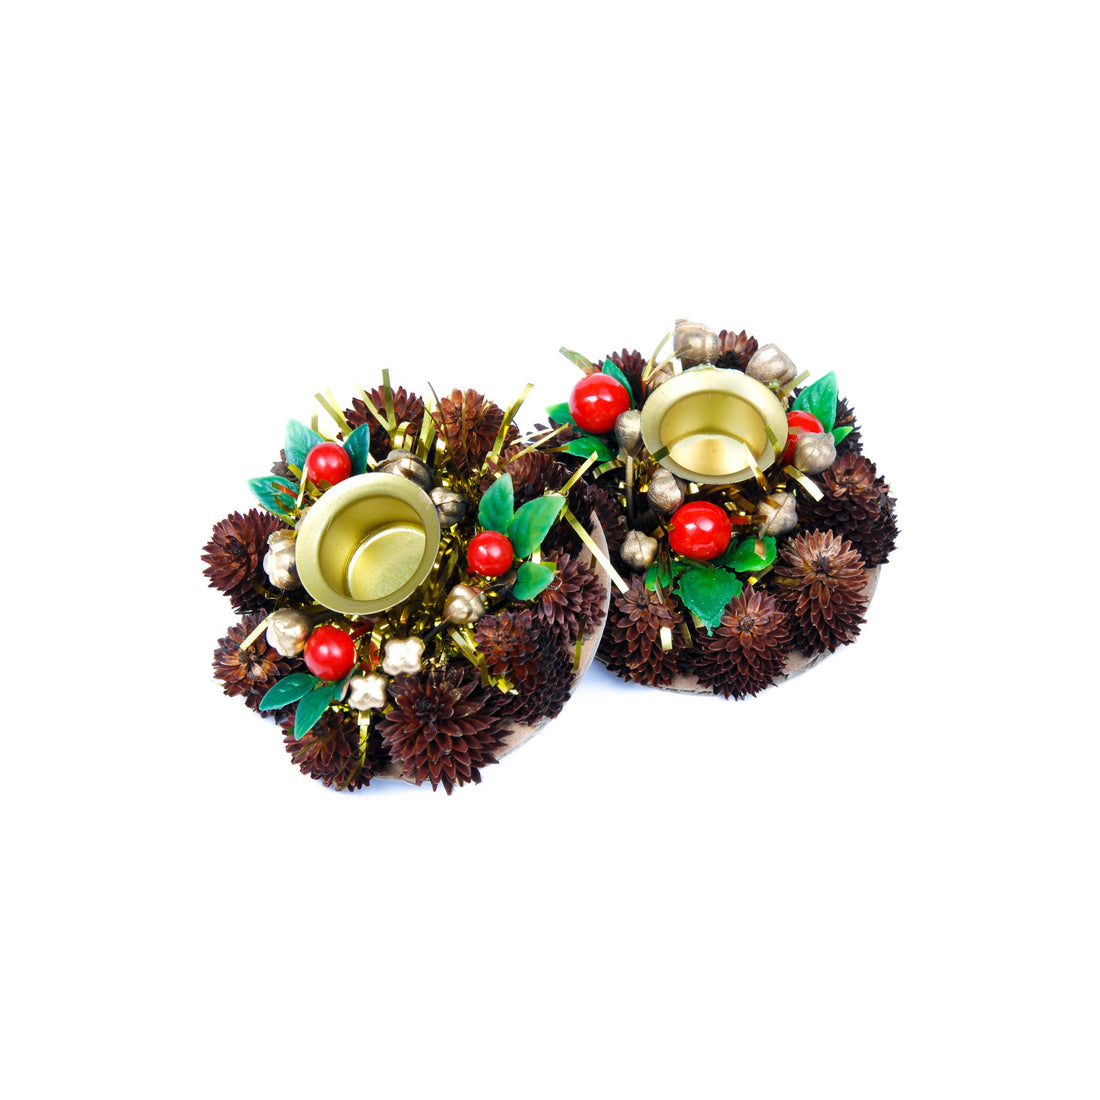 Decorative Holiday Candle Holders - Red Berries, Red Presents or Blue Presents